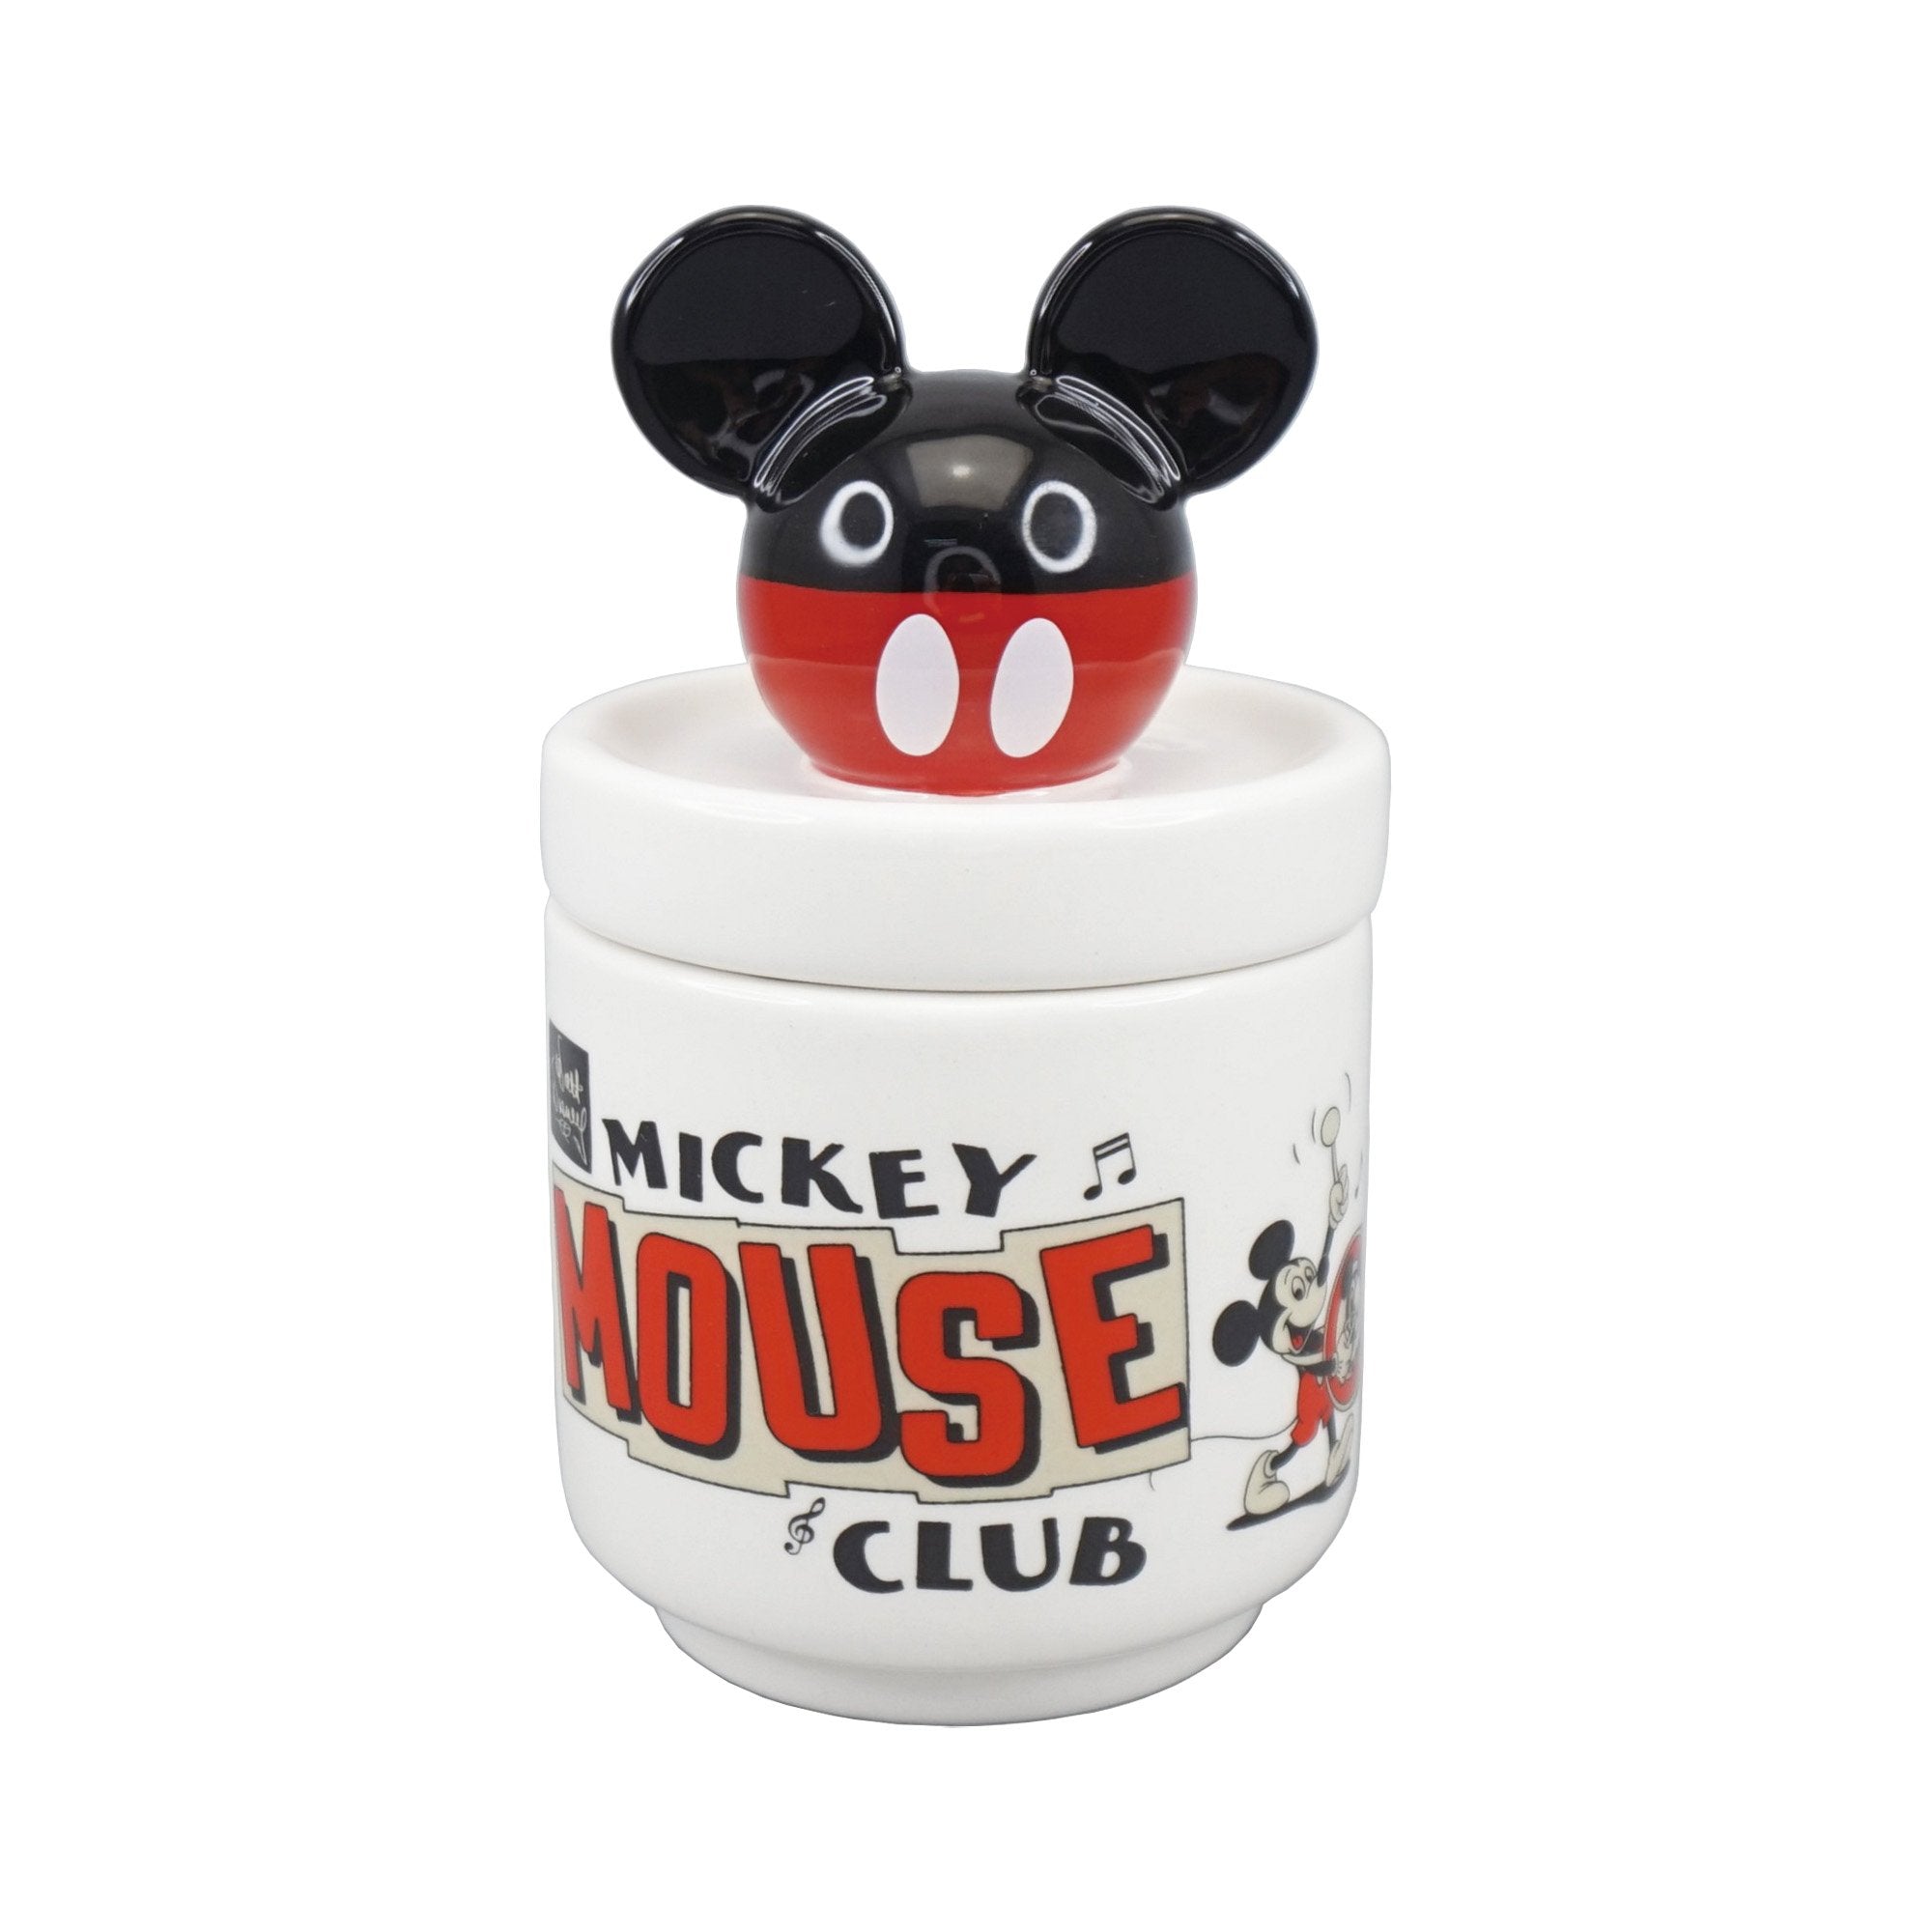 Collector's Box Boxed (14cm) - Disney Mickey Mouse